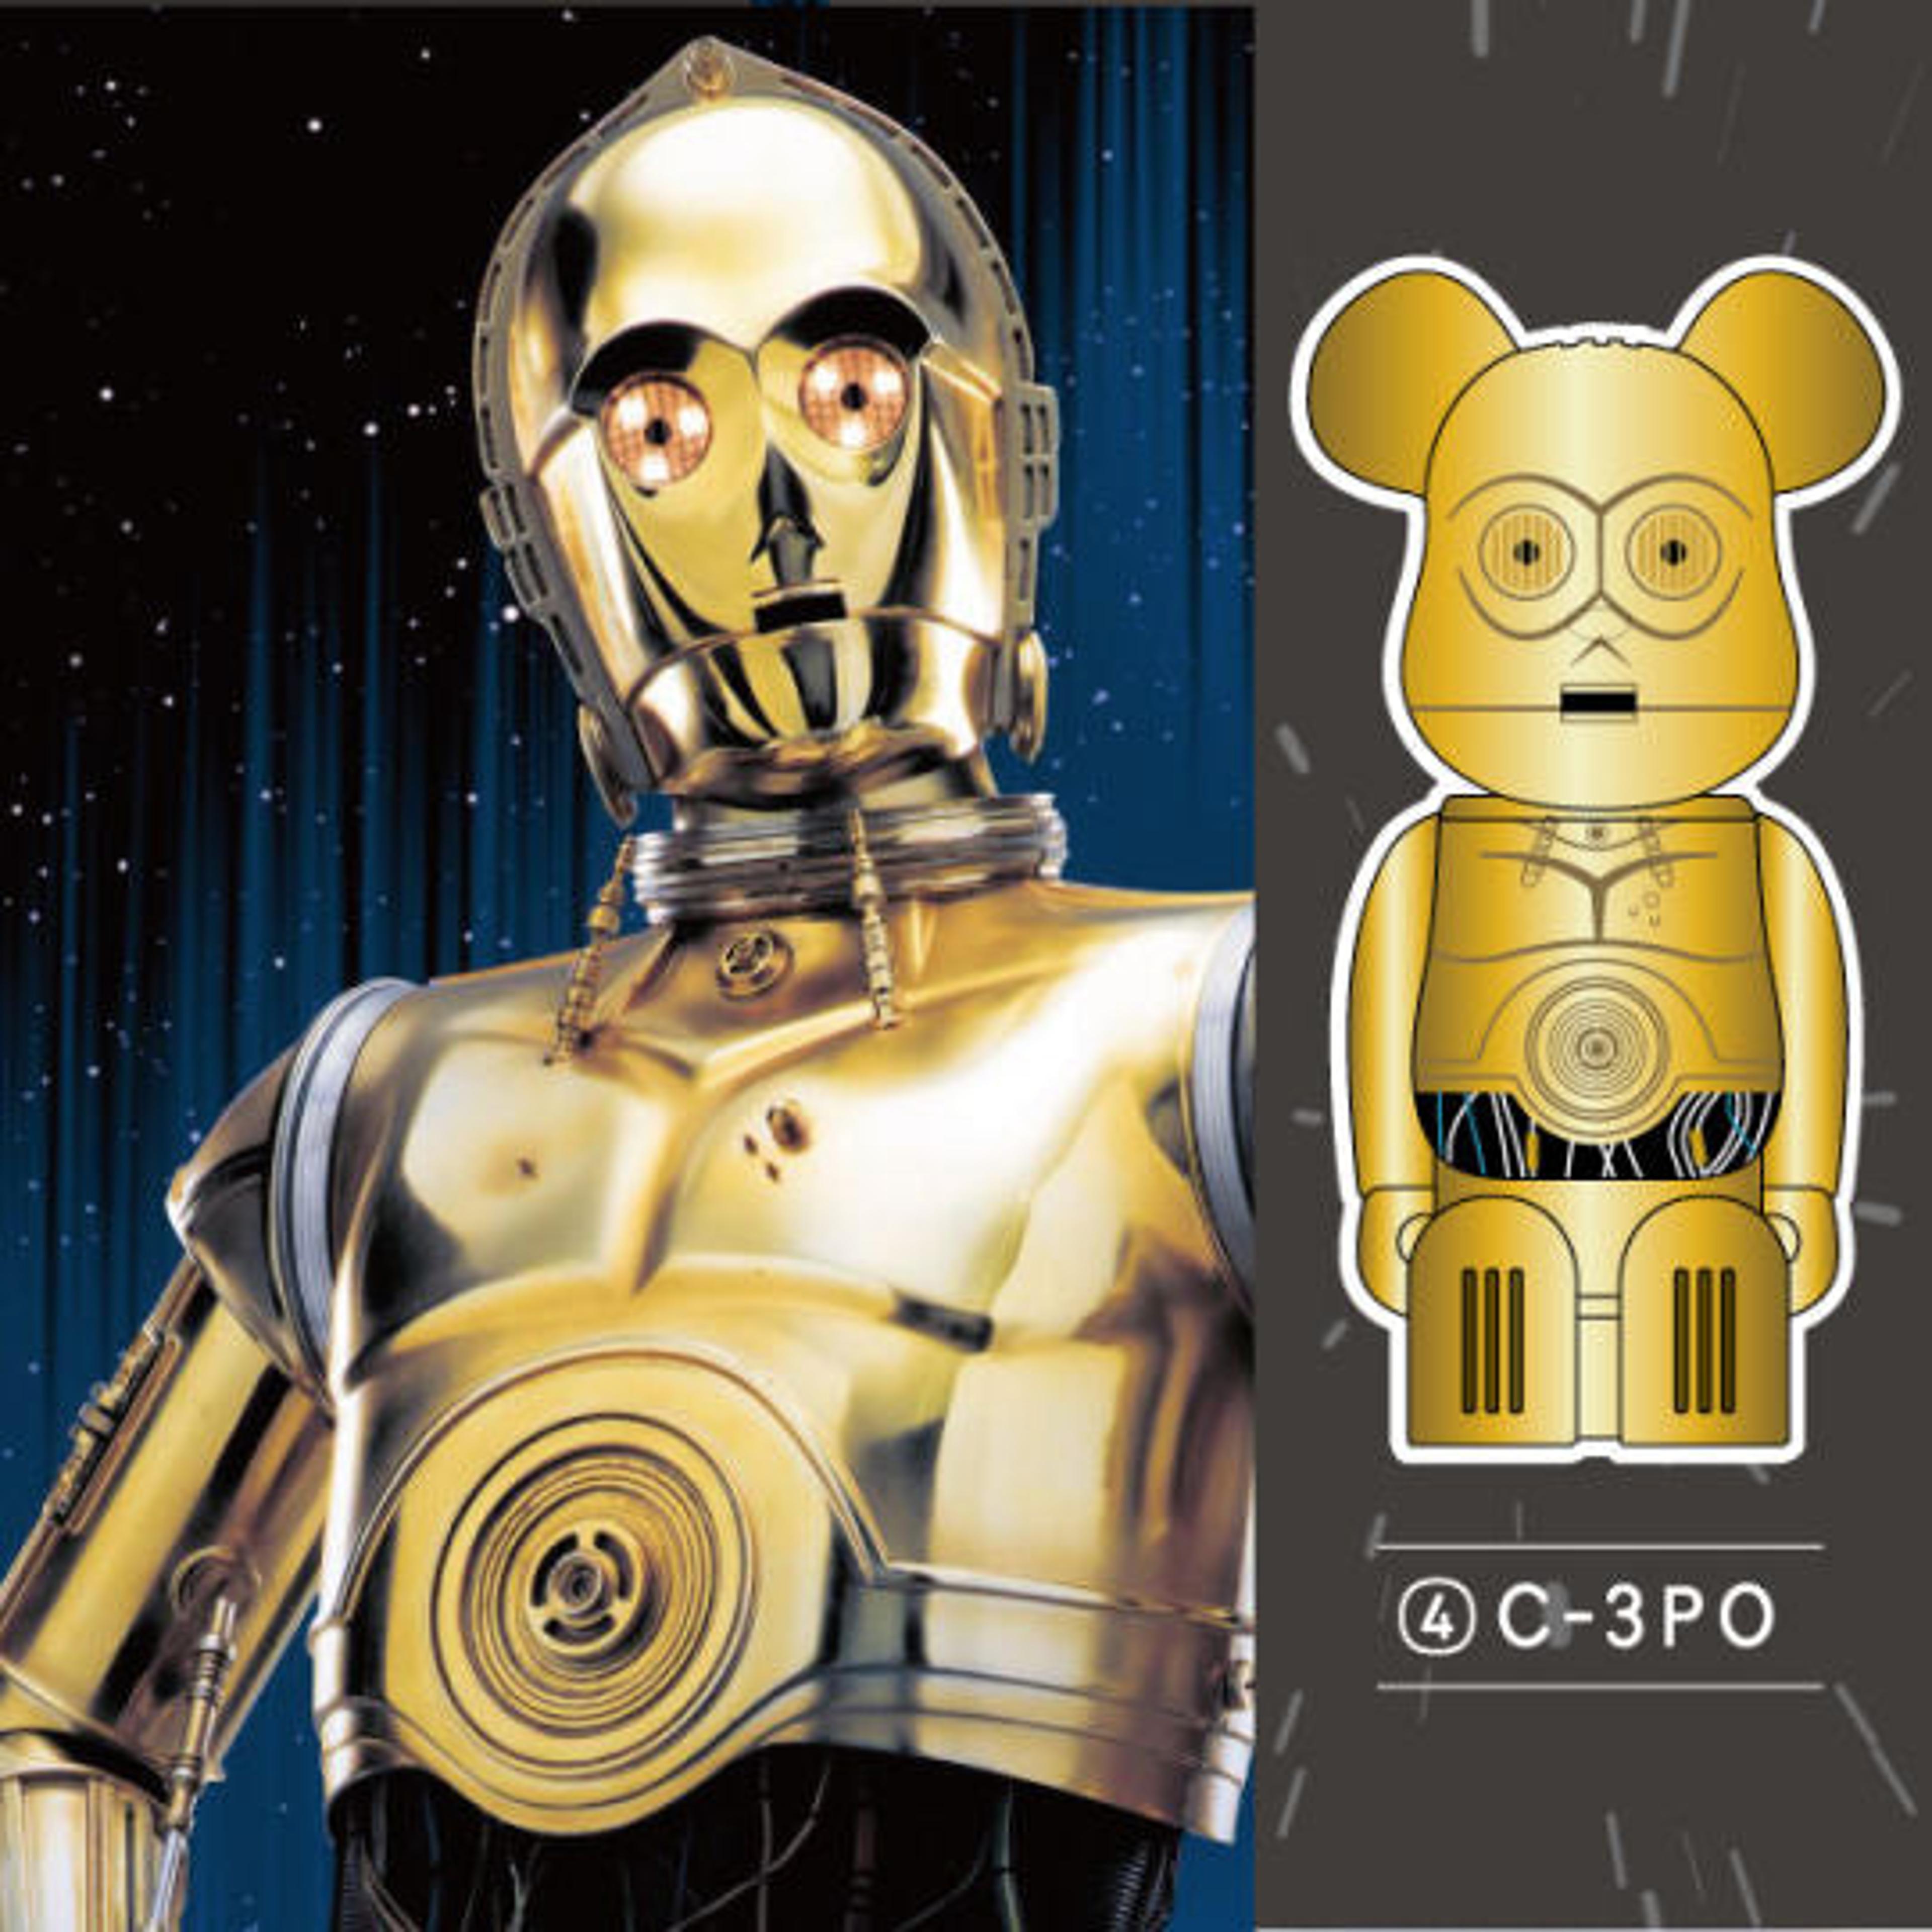 Alternate View 3 of Medicom Toy BE＠RBRICK Cleverin Star Wars 6 Piece Compete Set L